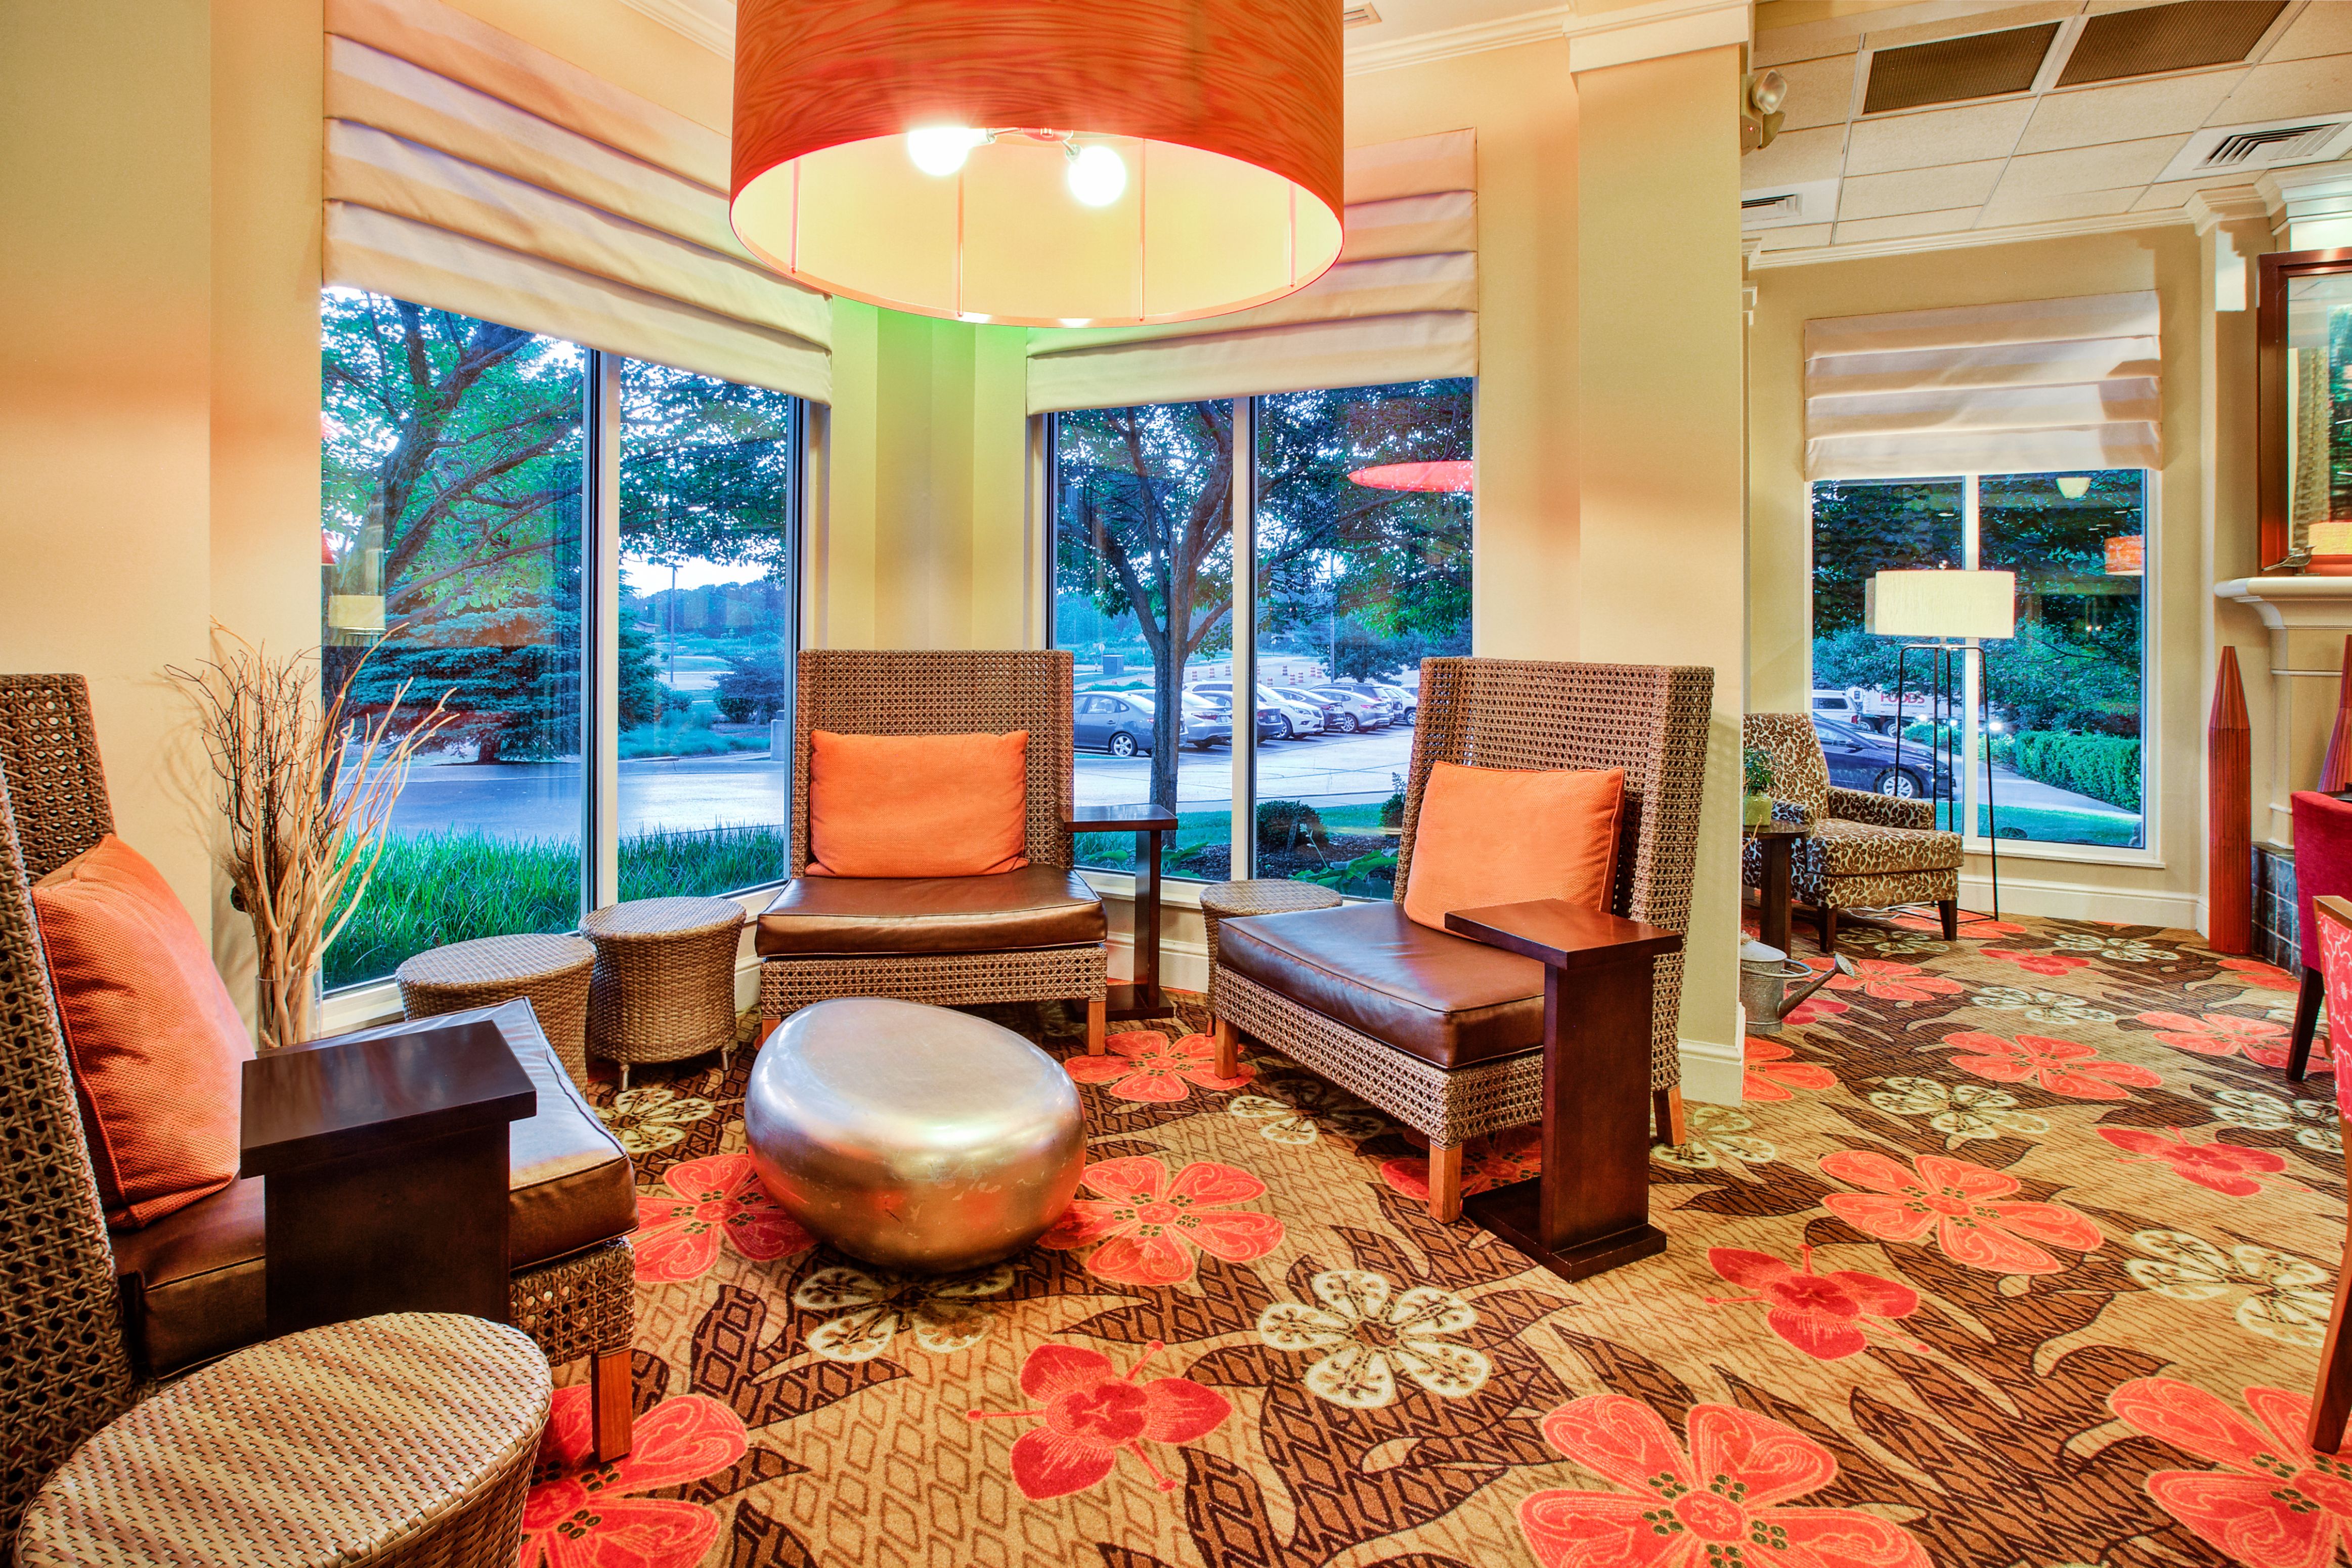 Lobby seating area with lounge chairs, ottoman, and windows with outdoor view